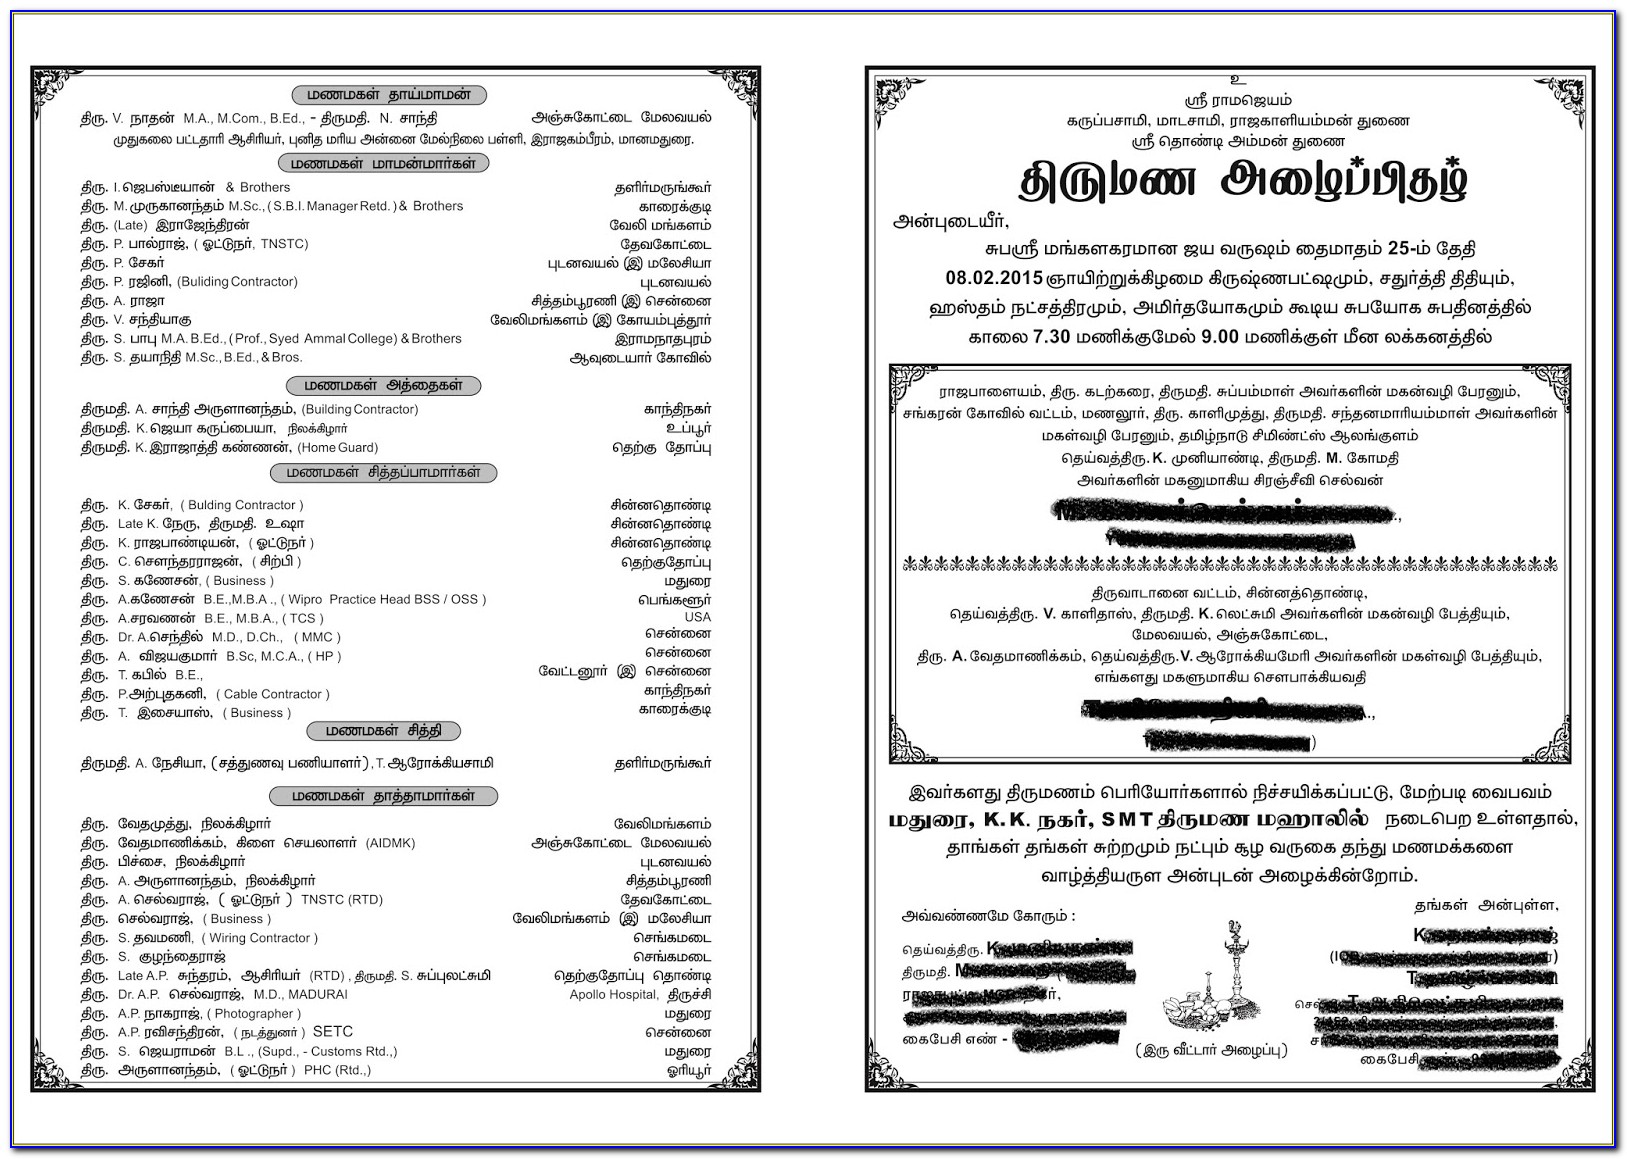 Bible Verses For Wedding Cards In Tamil